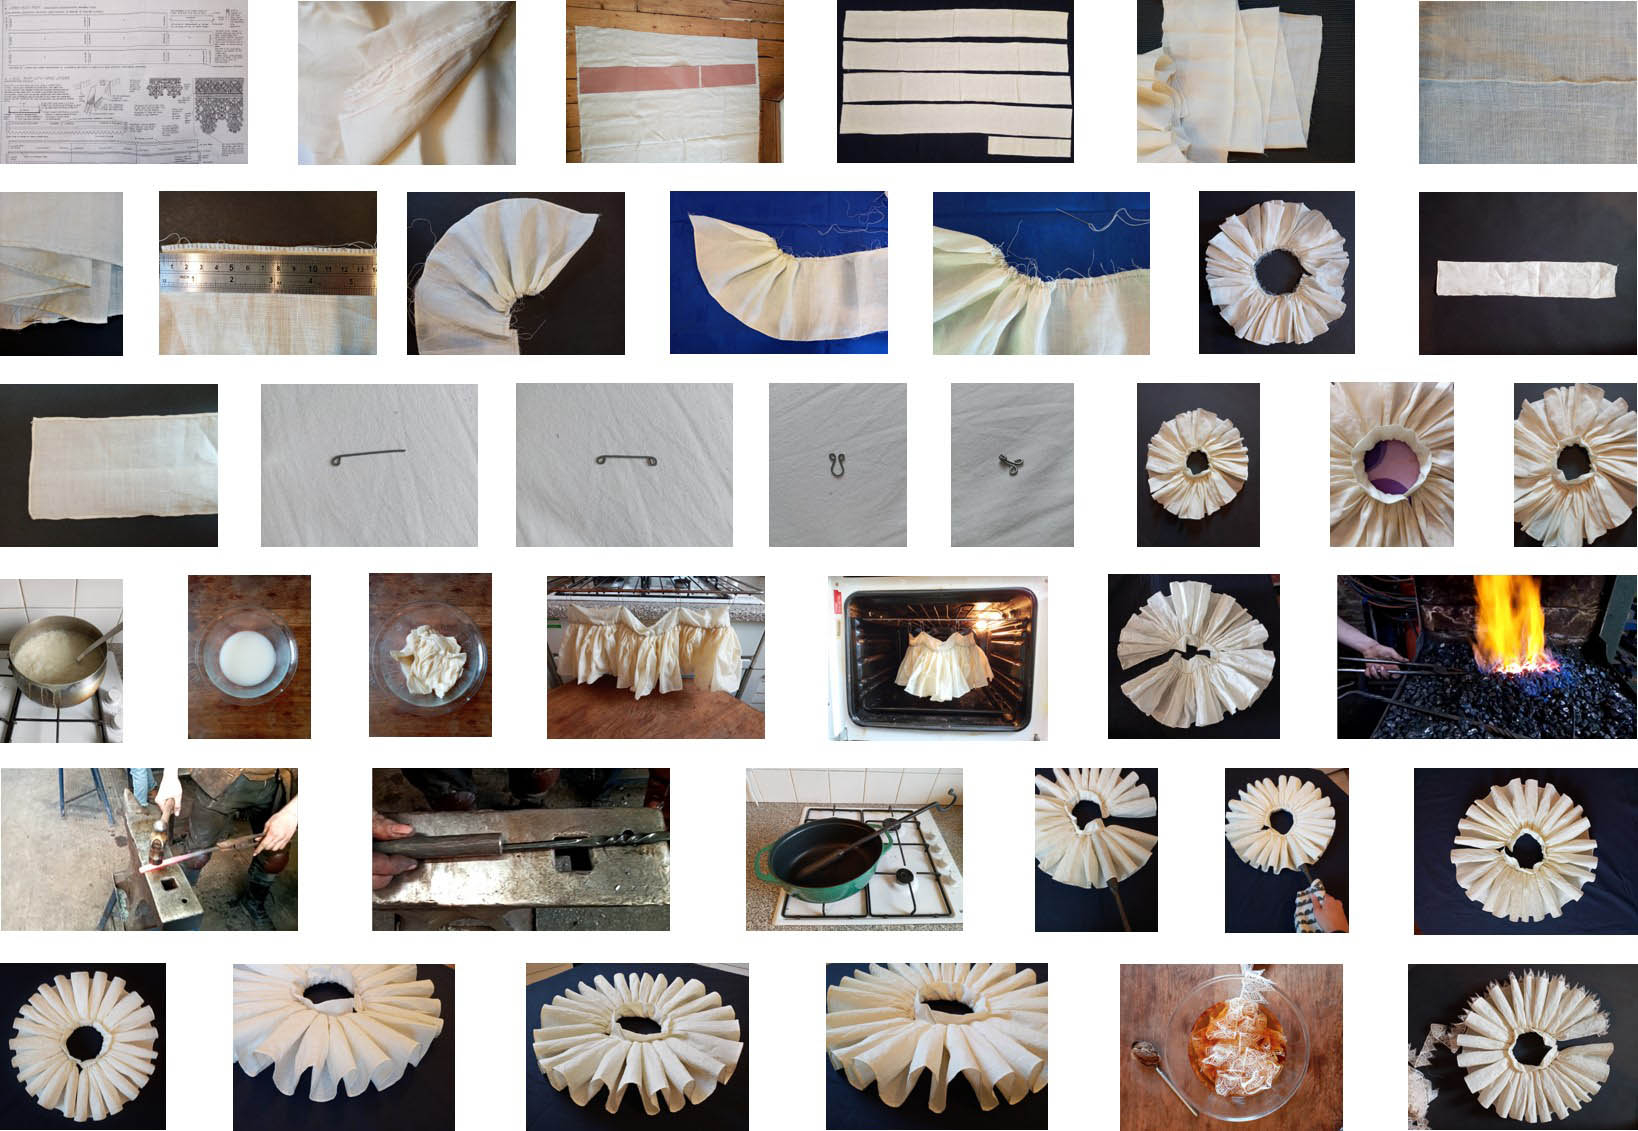 A collection of images documenting the process of making an historical ruff